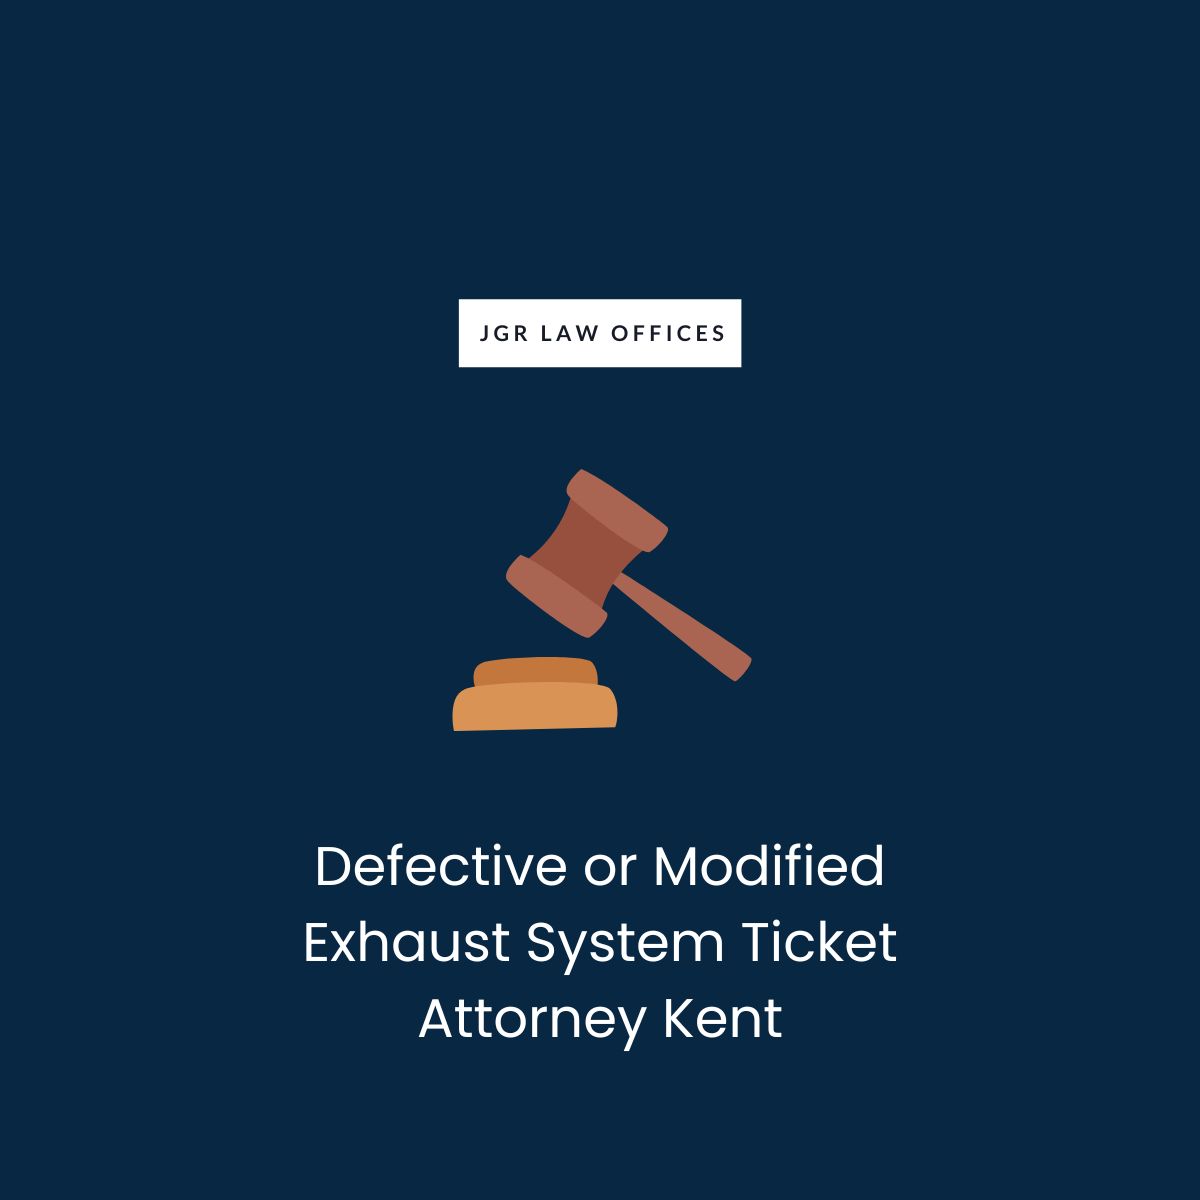 Defective or Modified Exhaust System Ticket Attorney Kent